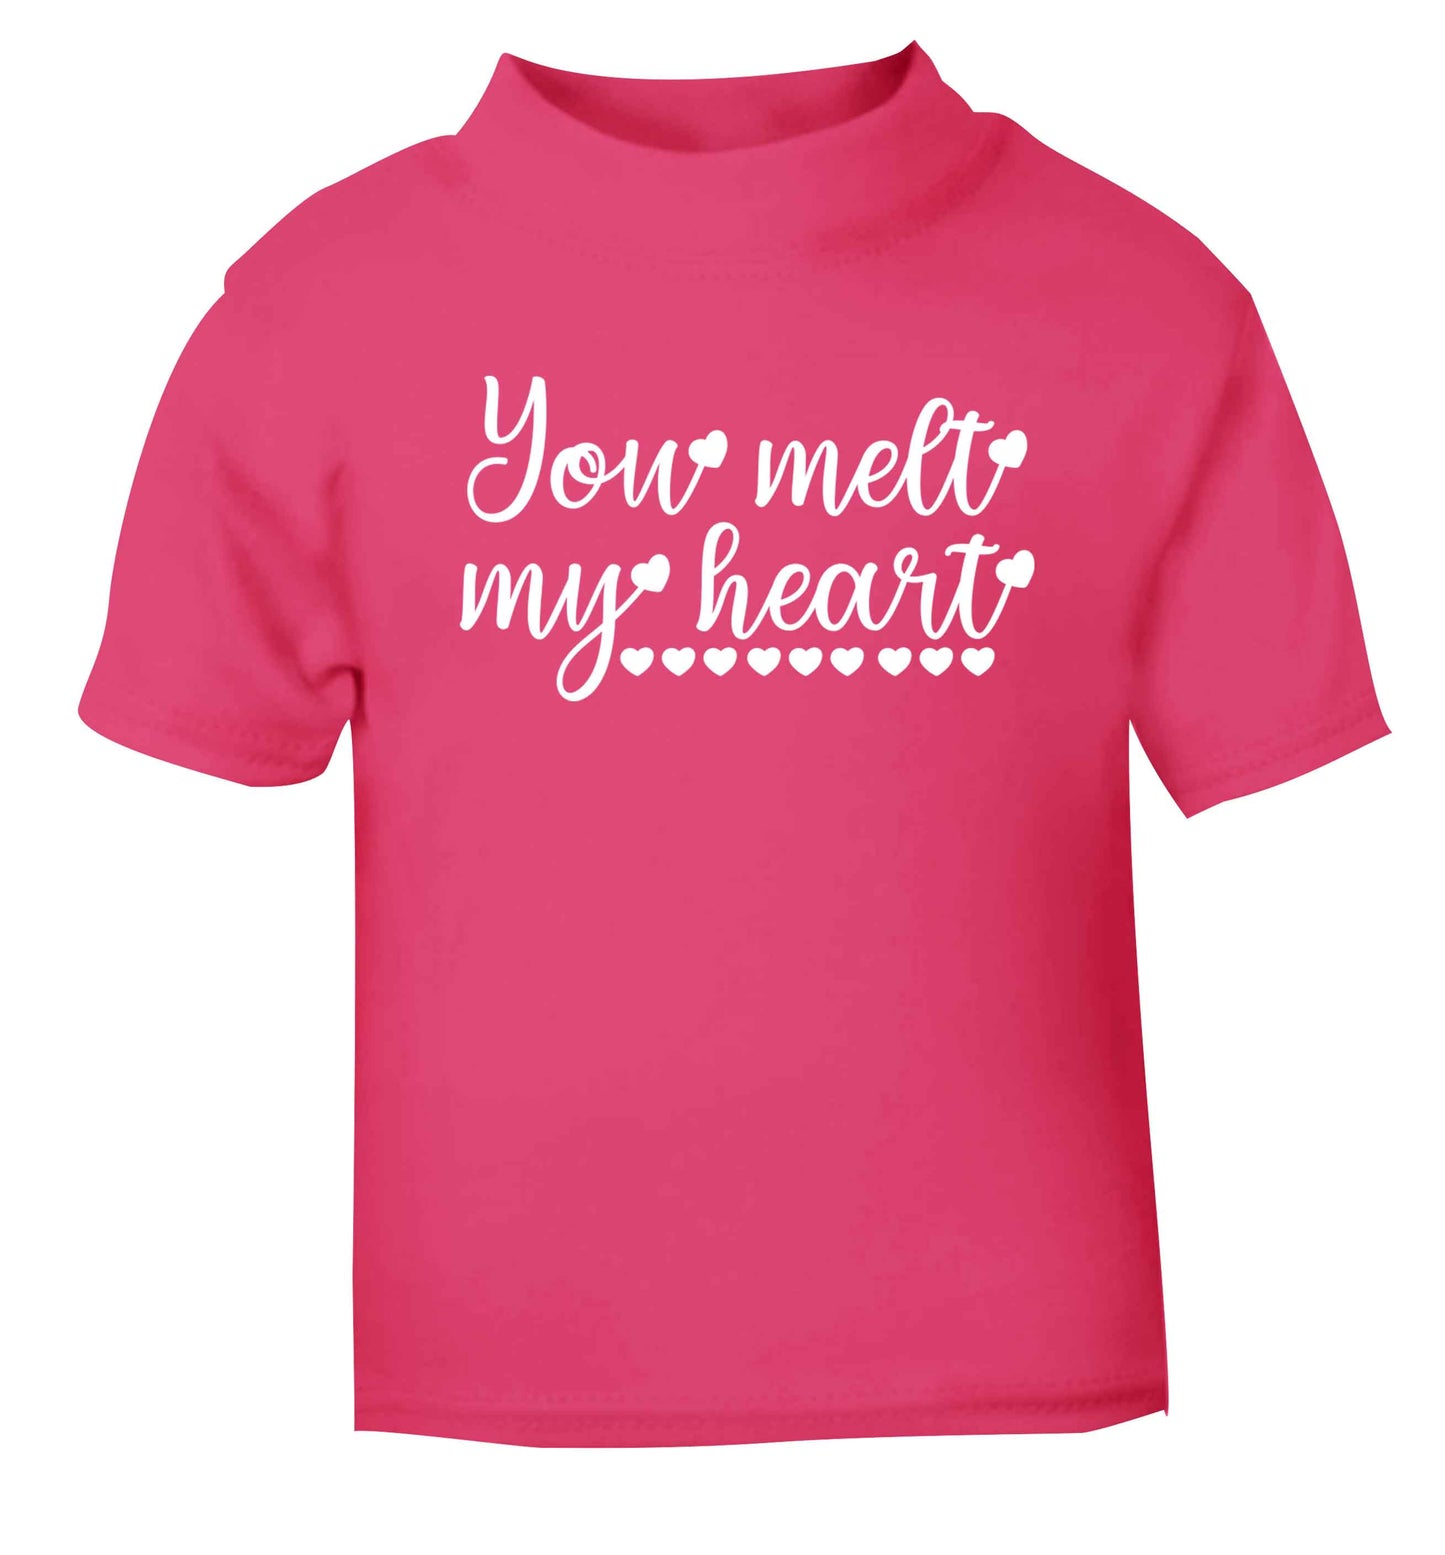 You melt my heart pink baby toddler Tshirt 2 Years